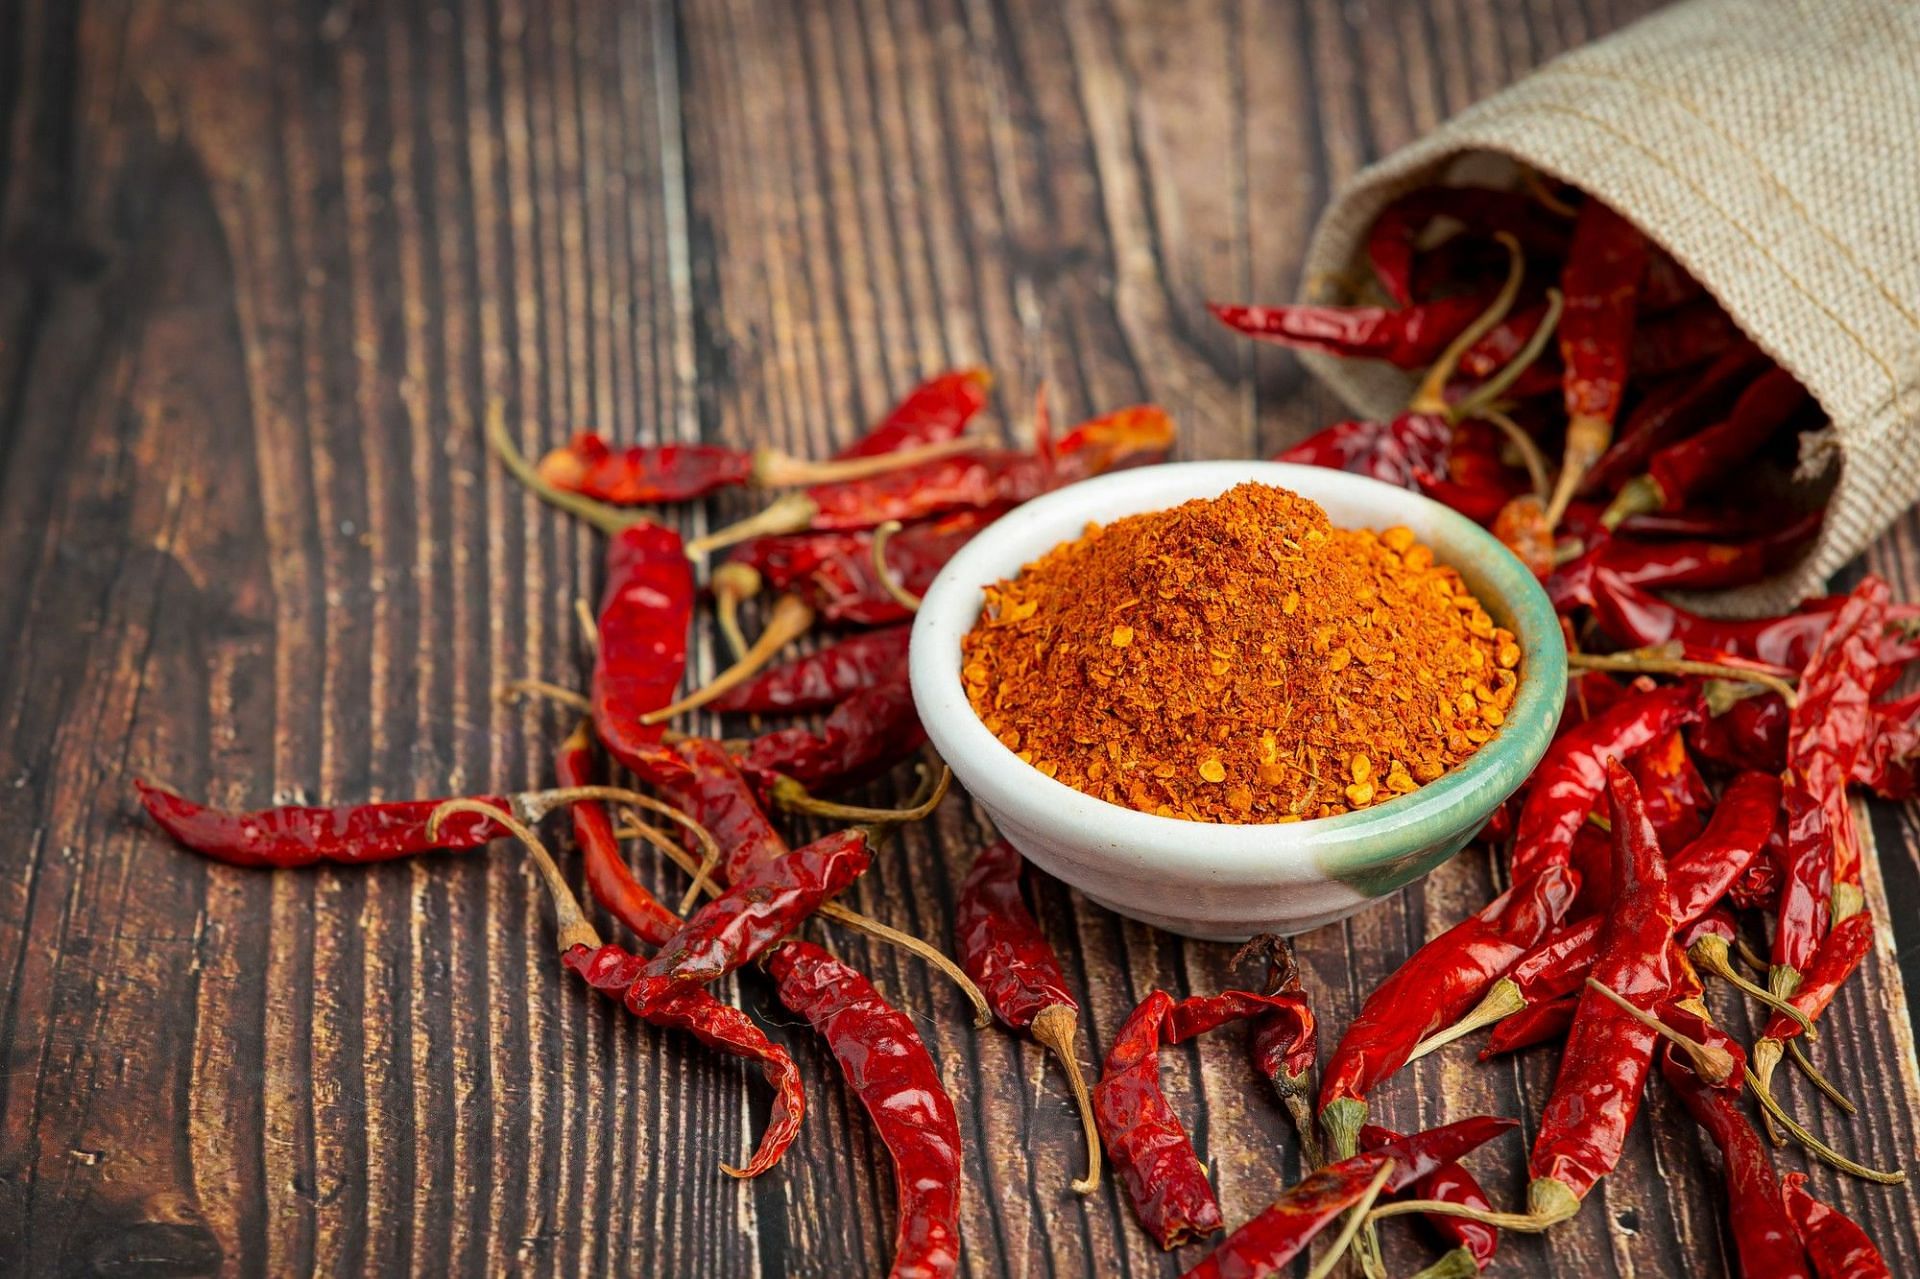 Cayenne Pepper helps in aiding digestion and promoting a better metabolic rate (Image by Jcomp on Freepik)